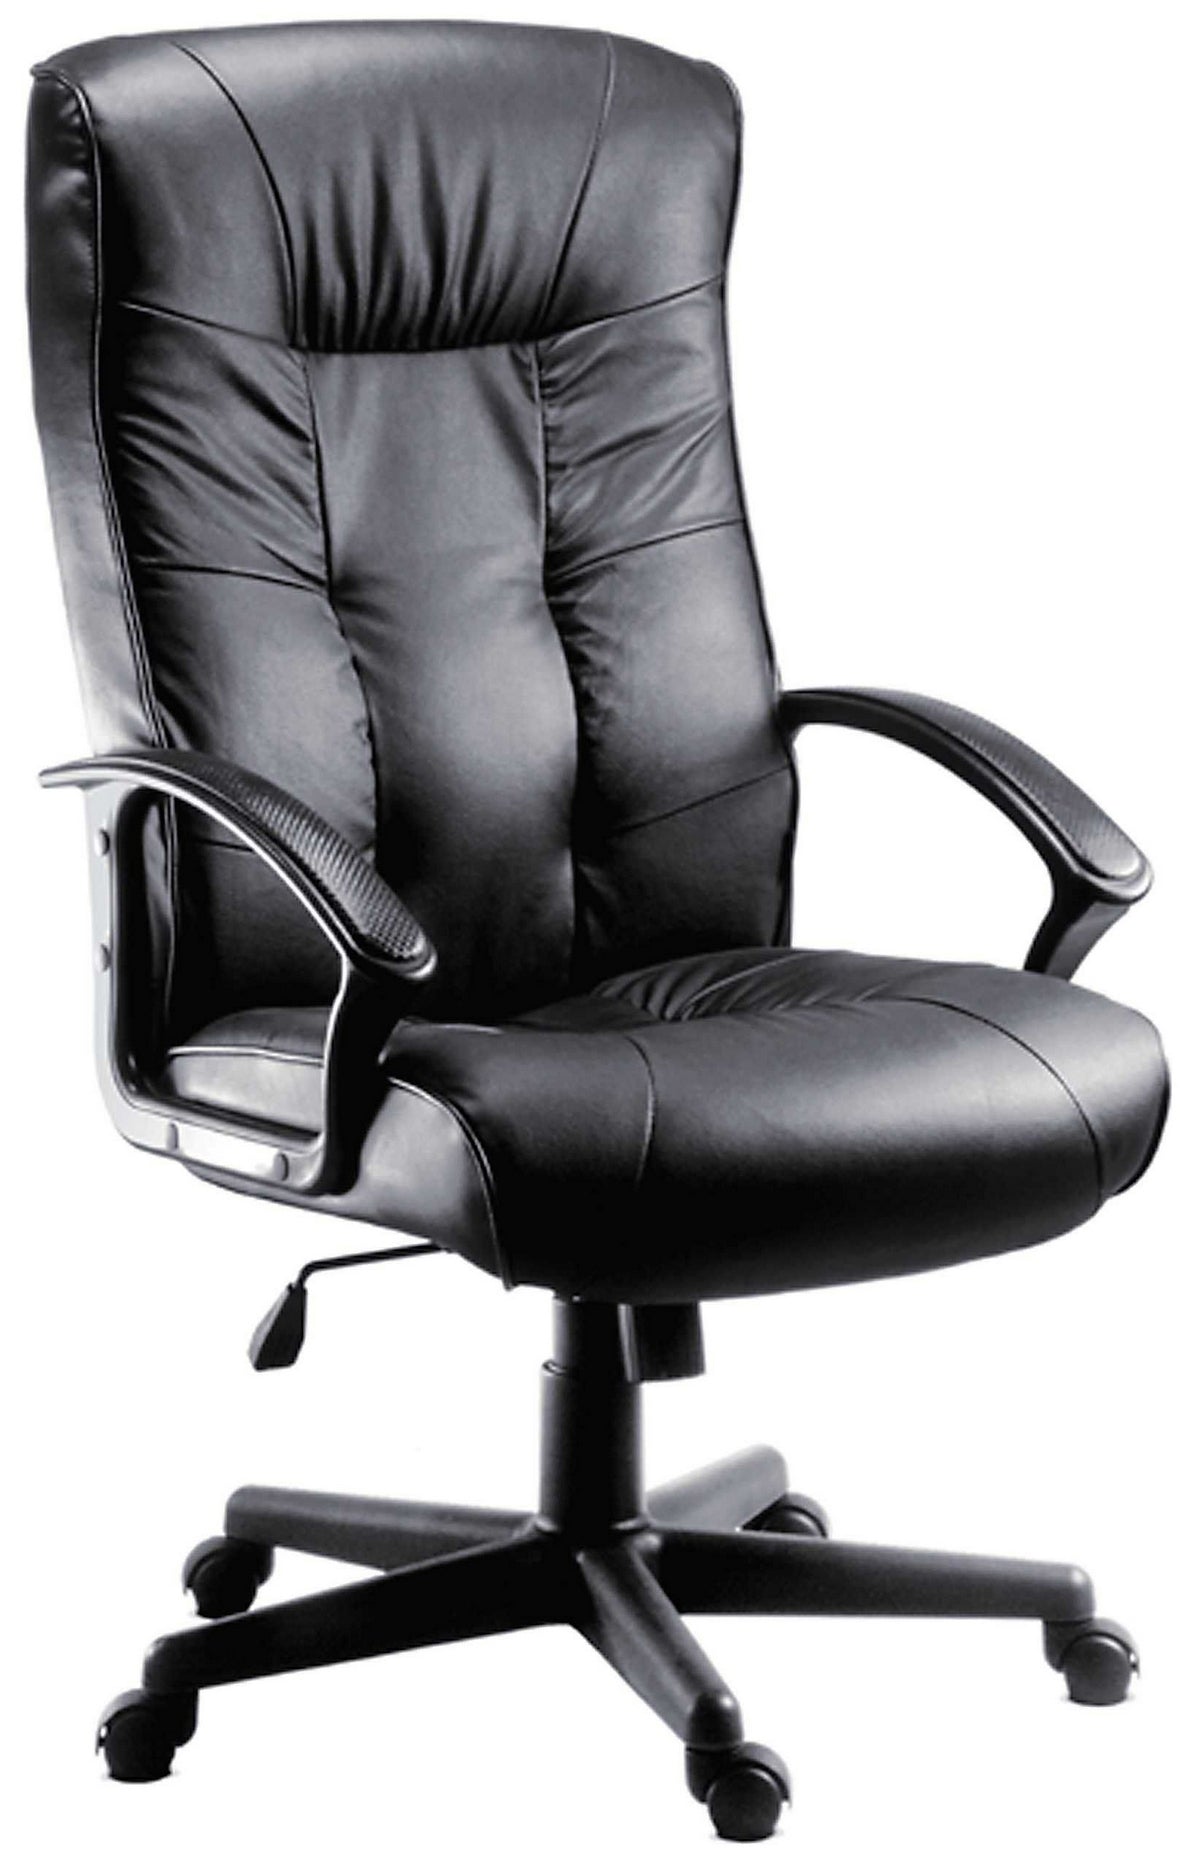 High Back Black Leather Executive Chair - GLOUCESTER North Yorkshire